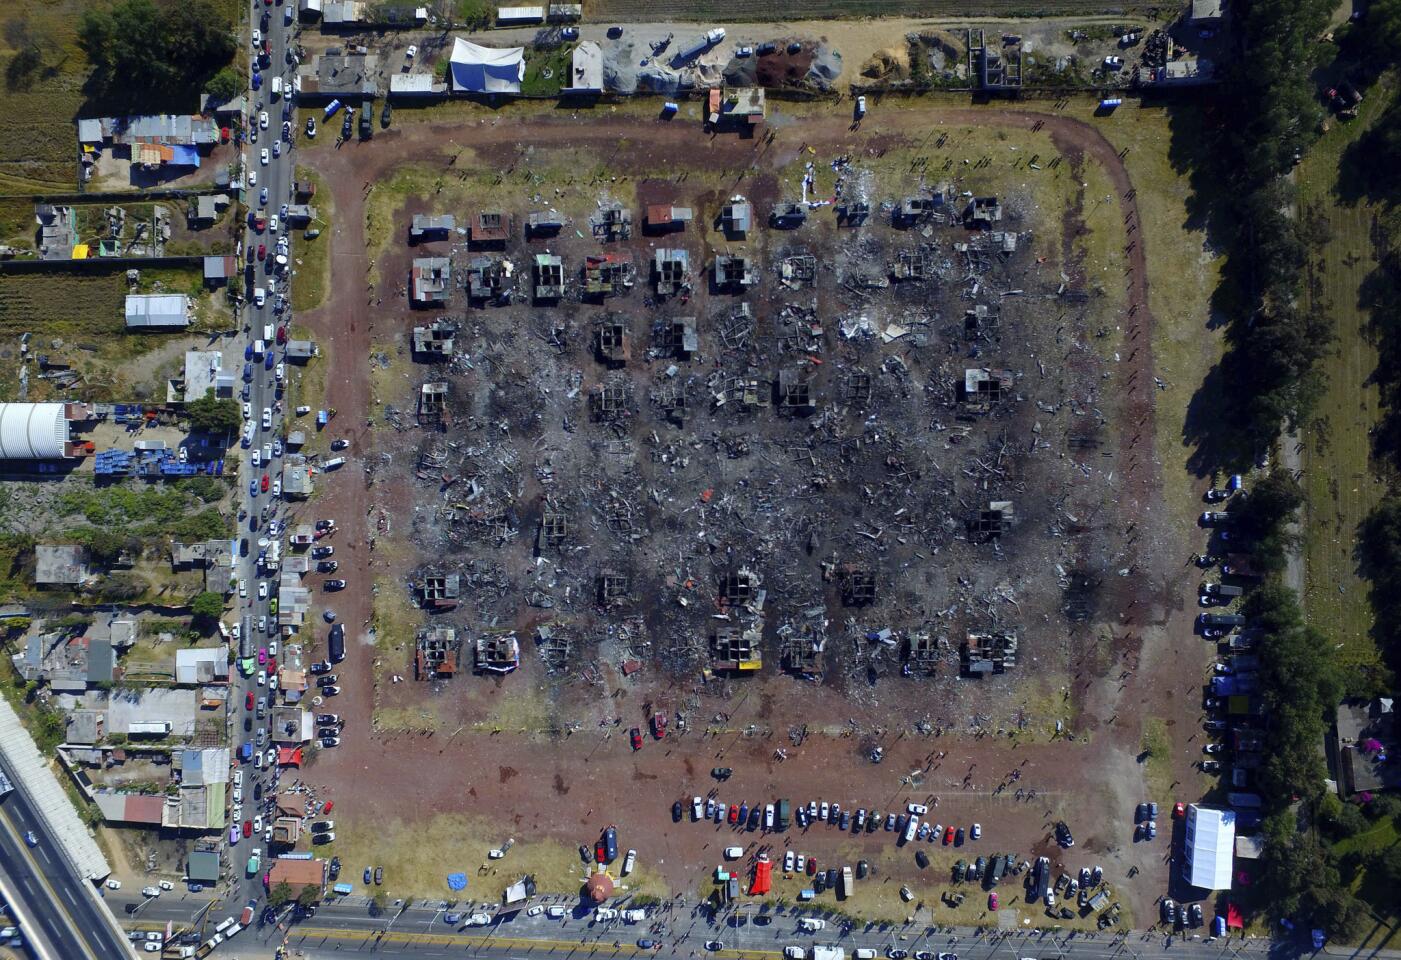 A fireworks market lays in ruins one day after an explosion at the San Pablito Market in Tultepec on the outskirts of Mexico City, Wednesday, Dec. 21, 2016. The market was especially well stocked for the holidays and bustling with hundreds of shoppers when a powerful chain-reaction explosion ripped through its stalls Tuesday, killing and injuring dozens.